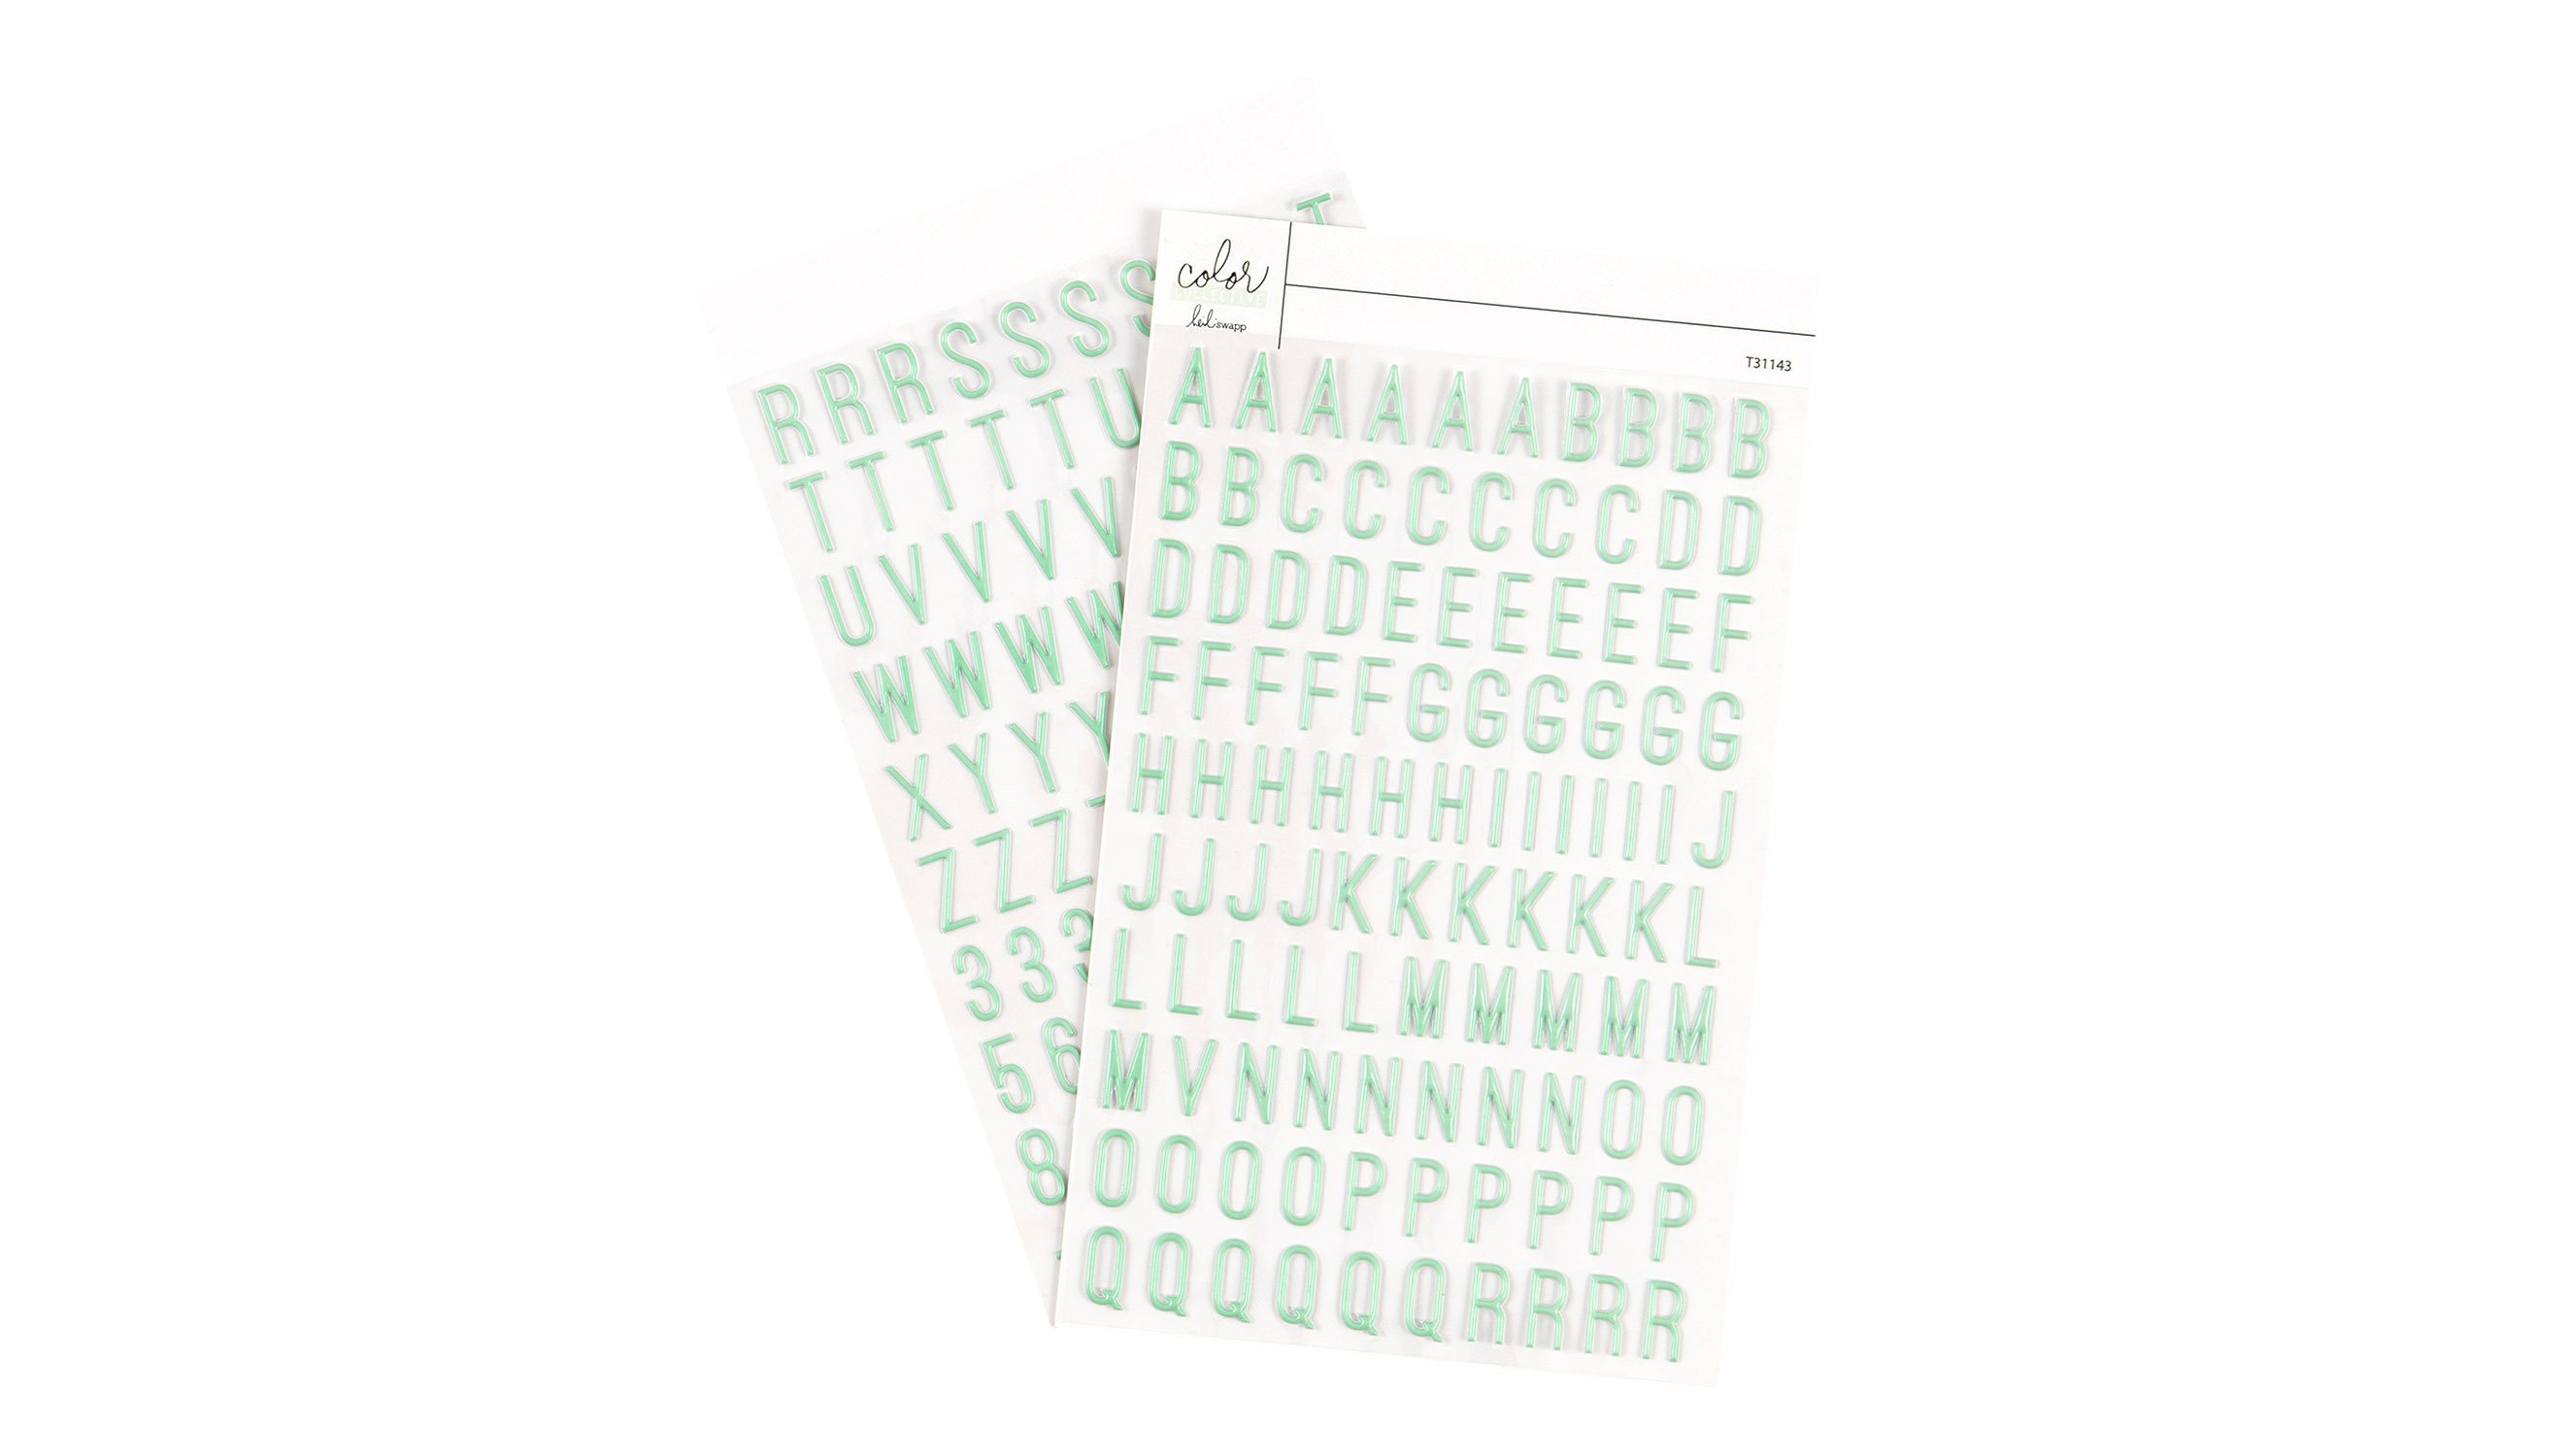 Color Collective 4x6 Puffy Alphabet Sticker Sheets - Heidi Swapp Shop